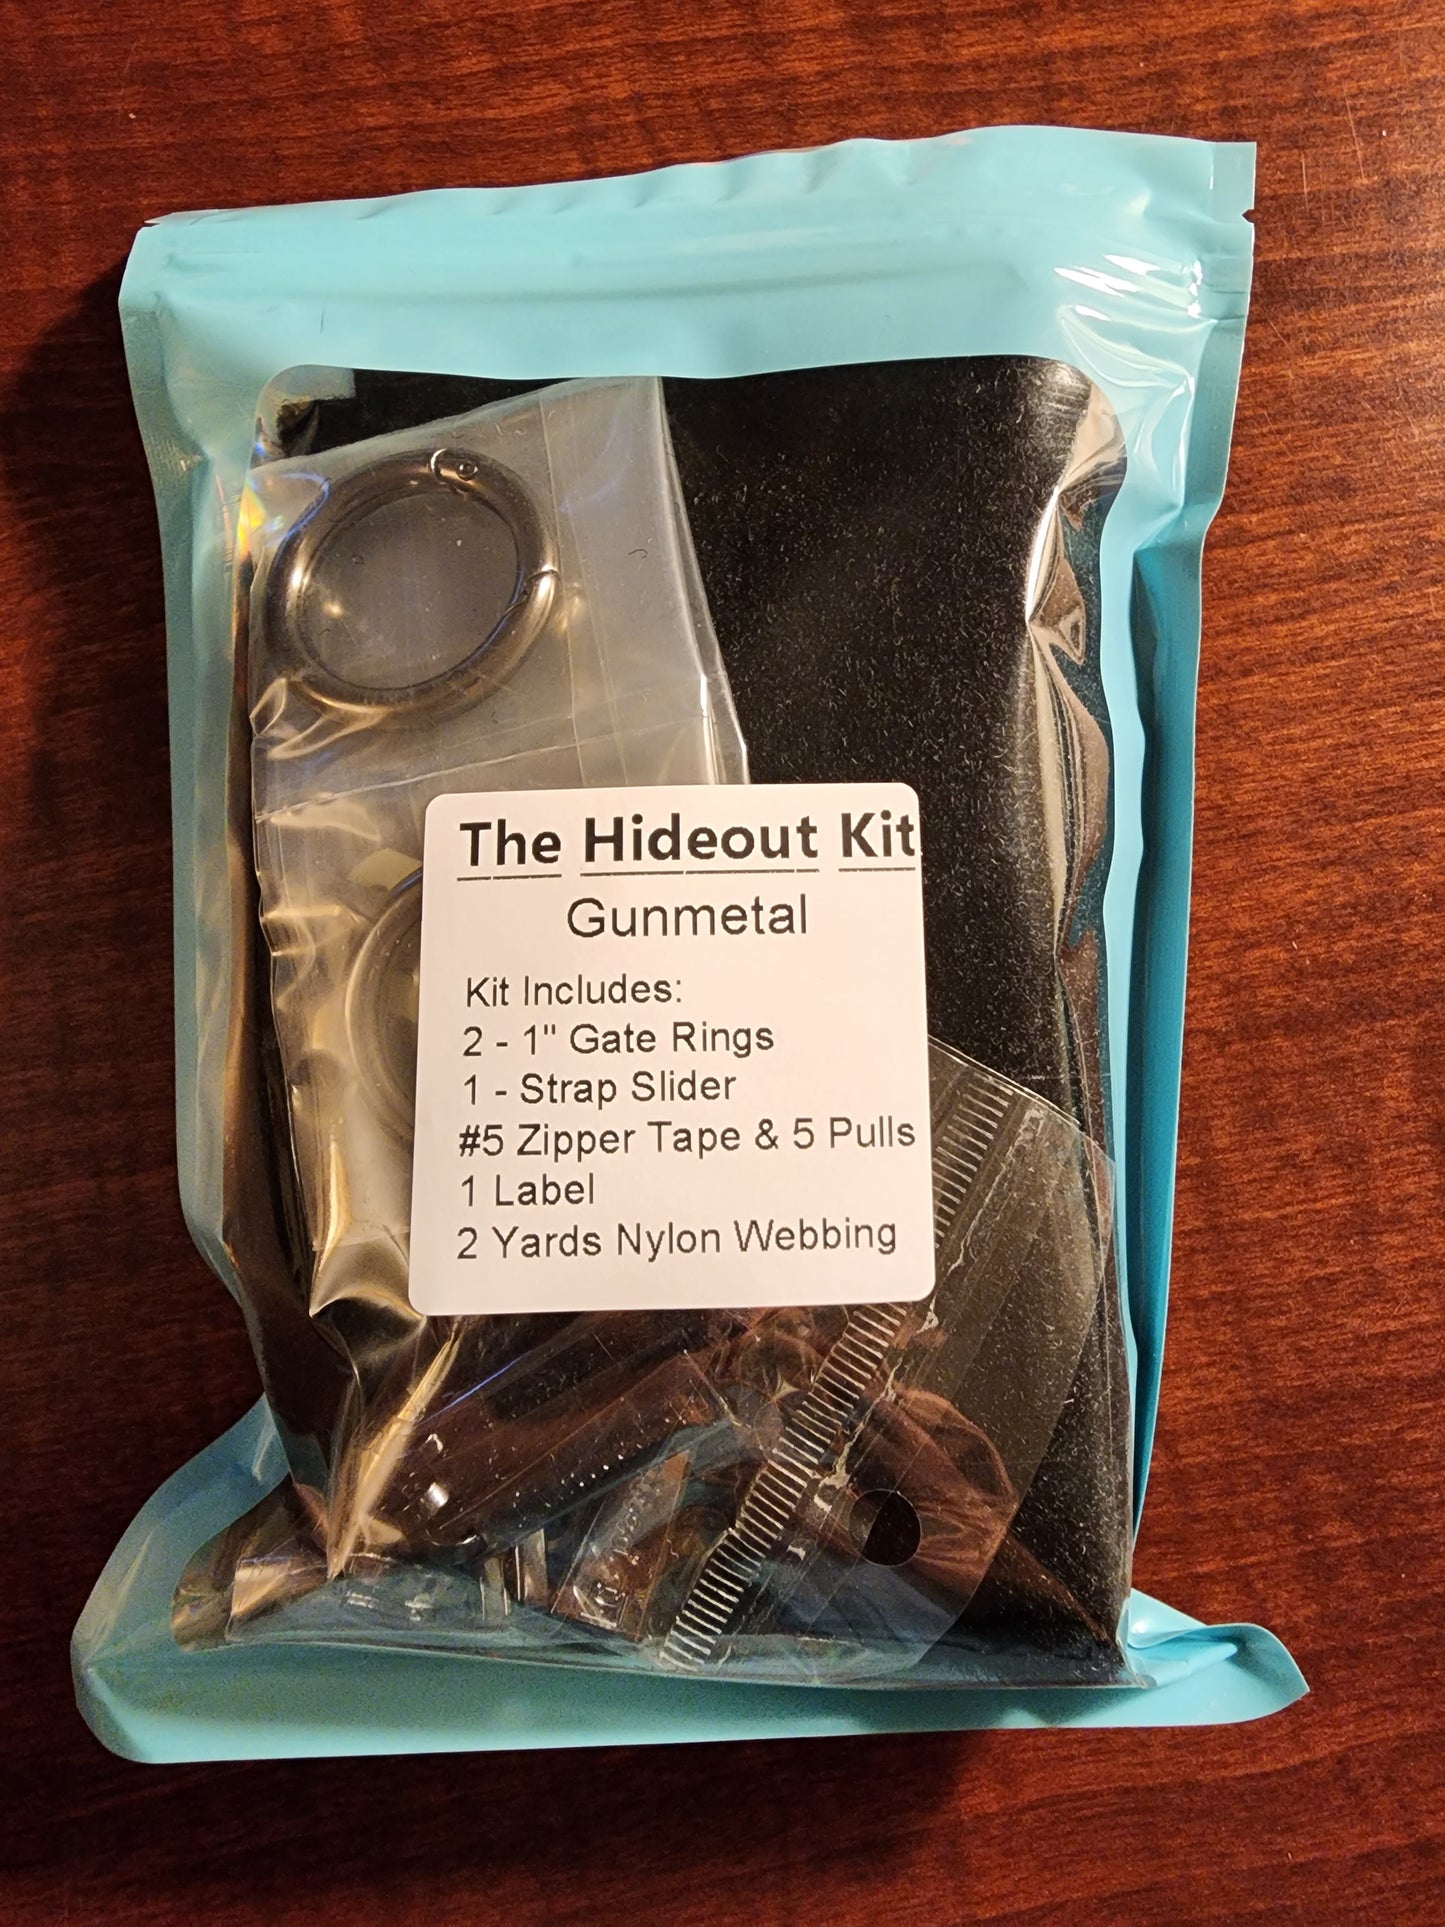 The Hideout Kit